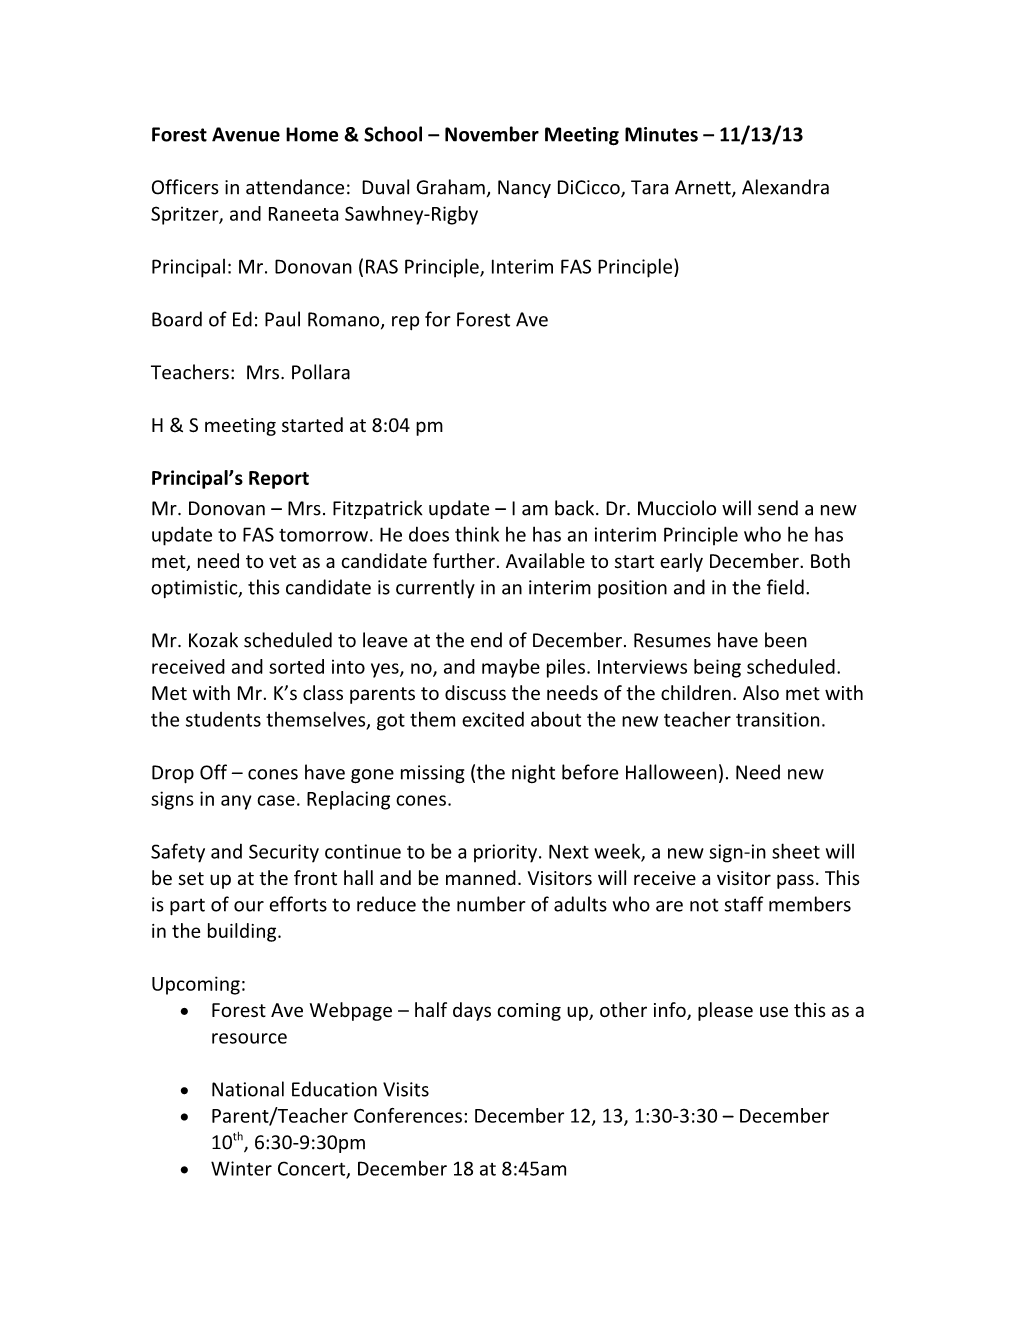 Forest Avenue Home & School November Meeting Minutes 11/13/13